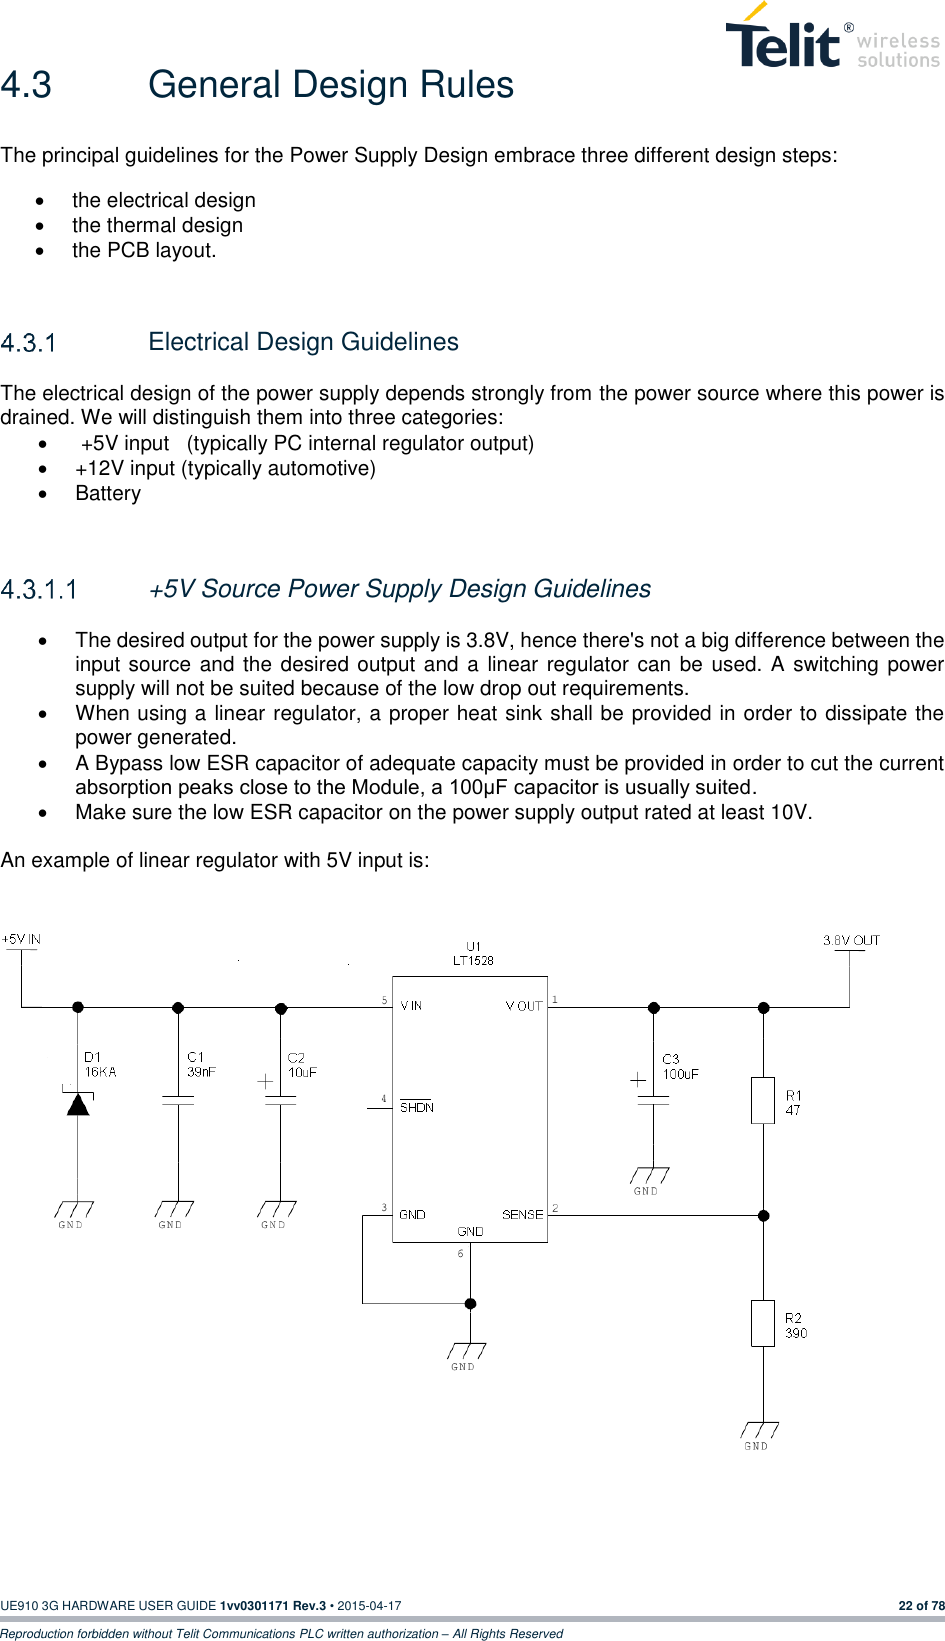  UE910 3G HARDWARE USER GUIDE 1vv0301171 Rev.3 • 2015-04-17 22 of 78 Reproduction forbidden without Telit Communications PLC written authorization – All Rights Reserved 4.3  General Design Rules The principal guidelines for the Power Supply Design embrace three different design steps:   the electrical design   the thermal design   the PCB layout.     Electrical Design Guidelines The electrical design of the power supply depends strongly from the power source where this power is drained. We will distinguish them into three categories:    +5V input   (typically PC internal regulator output)   +12V input (typically automotive)   Battery    +5V Source Power Supply Design Guidelines    The desired output for the power supply is 3.8V, hence there&apos;s not a big difference between the input source  and the desired output and a linear regulator can be  used. A switching power supply will not be suited because of the low drop out requirements.   When using a linear regulator, a proper heat sink shall be provided in order to dissipate the power generated.   A Bypass low ESR capacitor of adequate capacity must be provided in order to cut the current absorption peaks close to the Module, a 100μF capacitor is usually suited.   Make sure the low ESR capacitor on the power supply output rated at least 10V.  An example of linear regulator with 5V input is:      